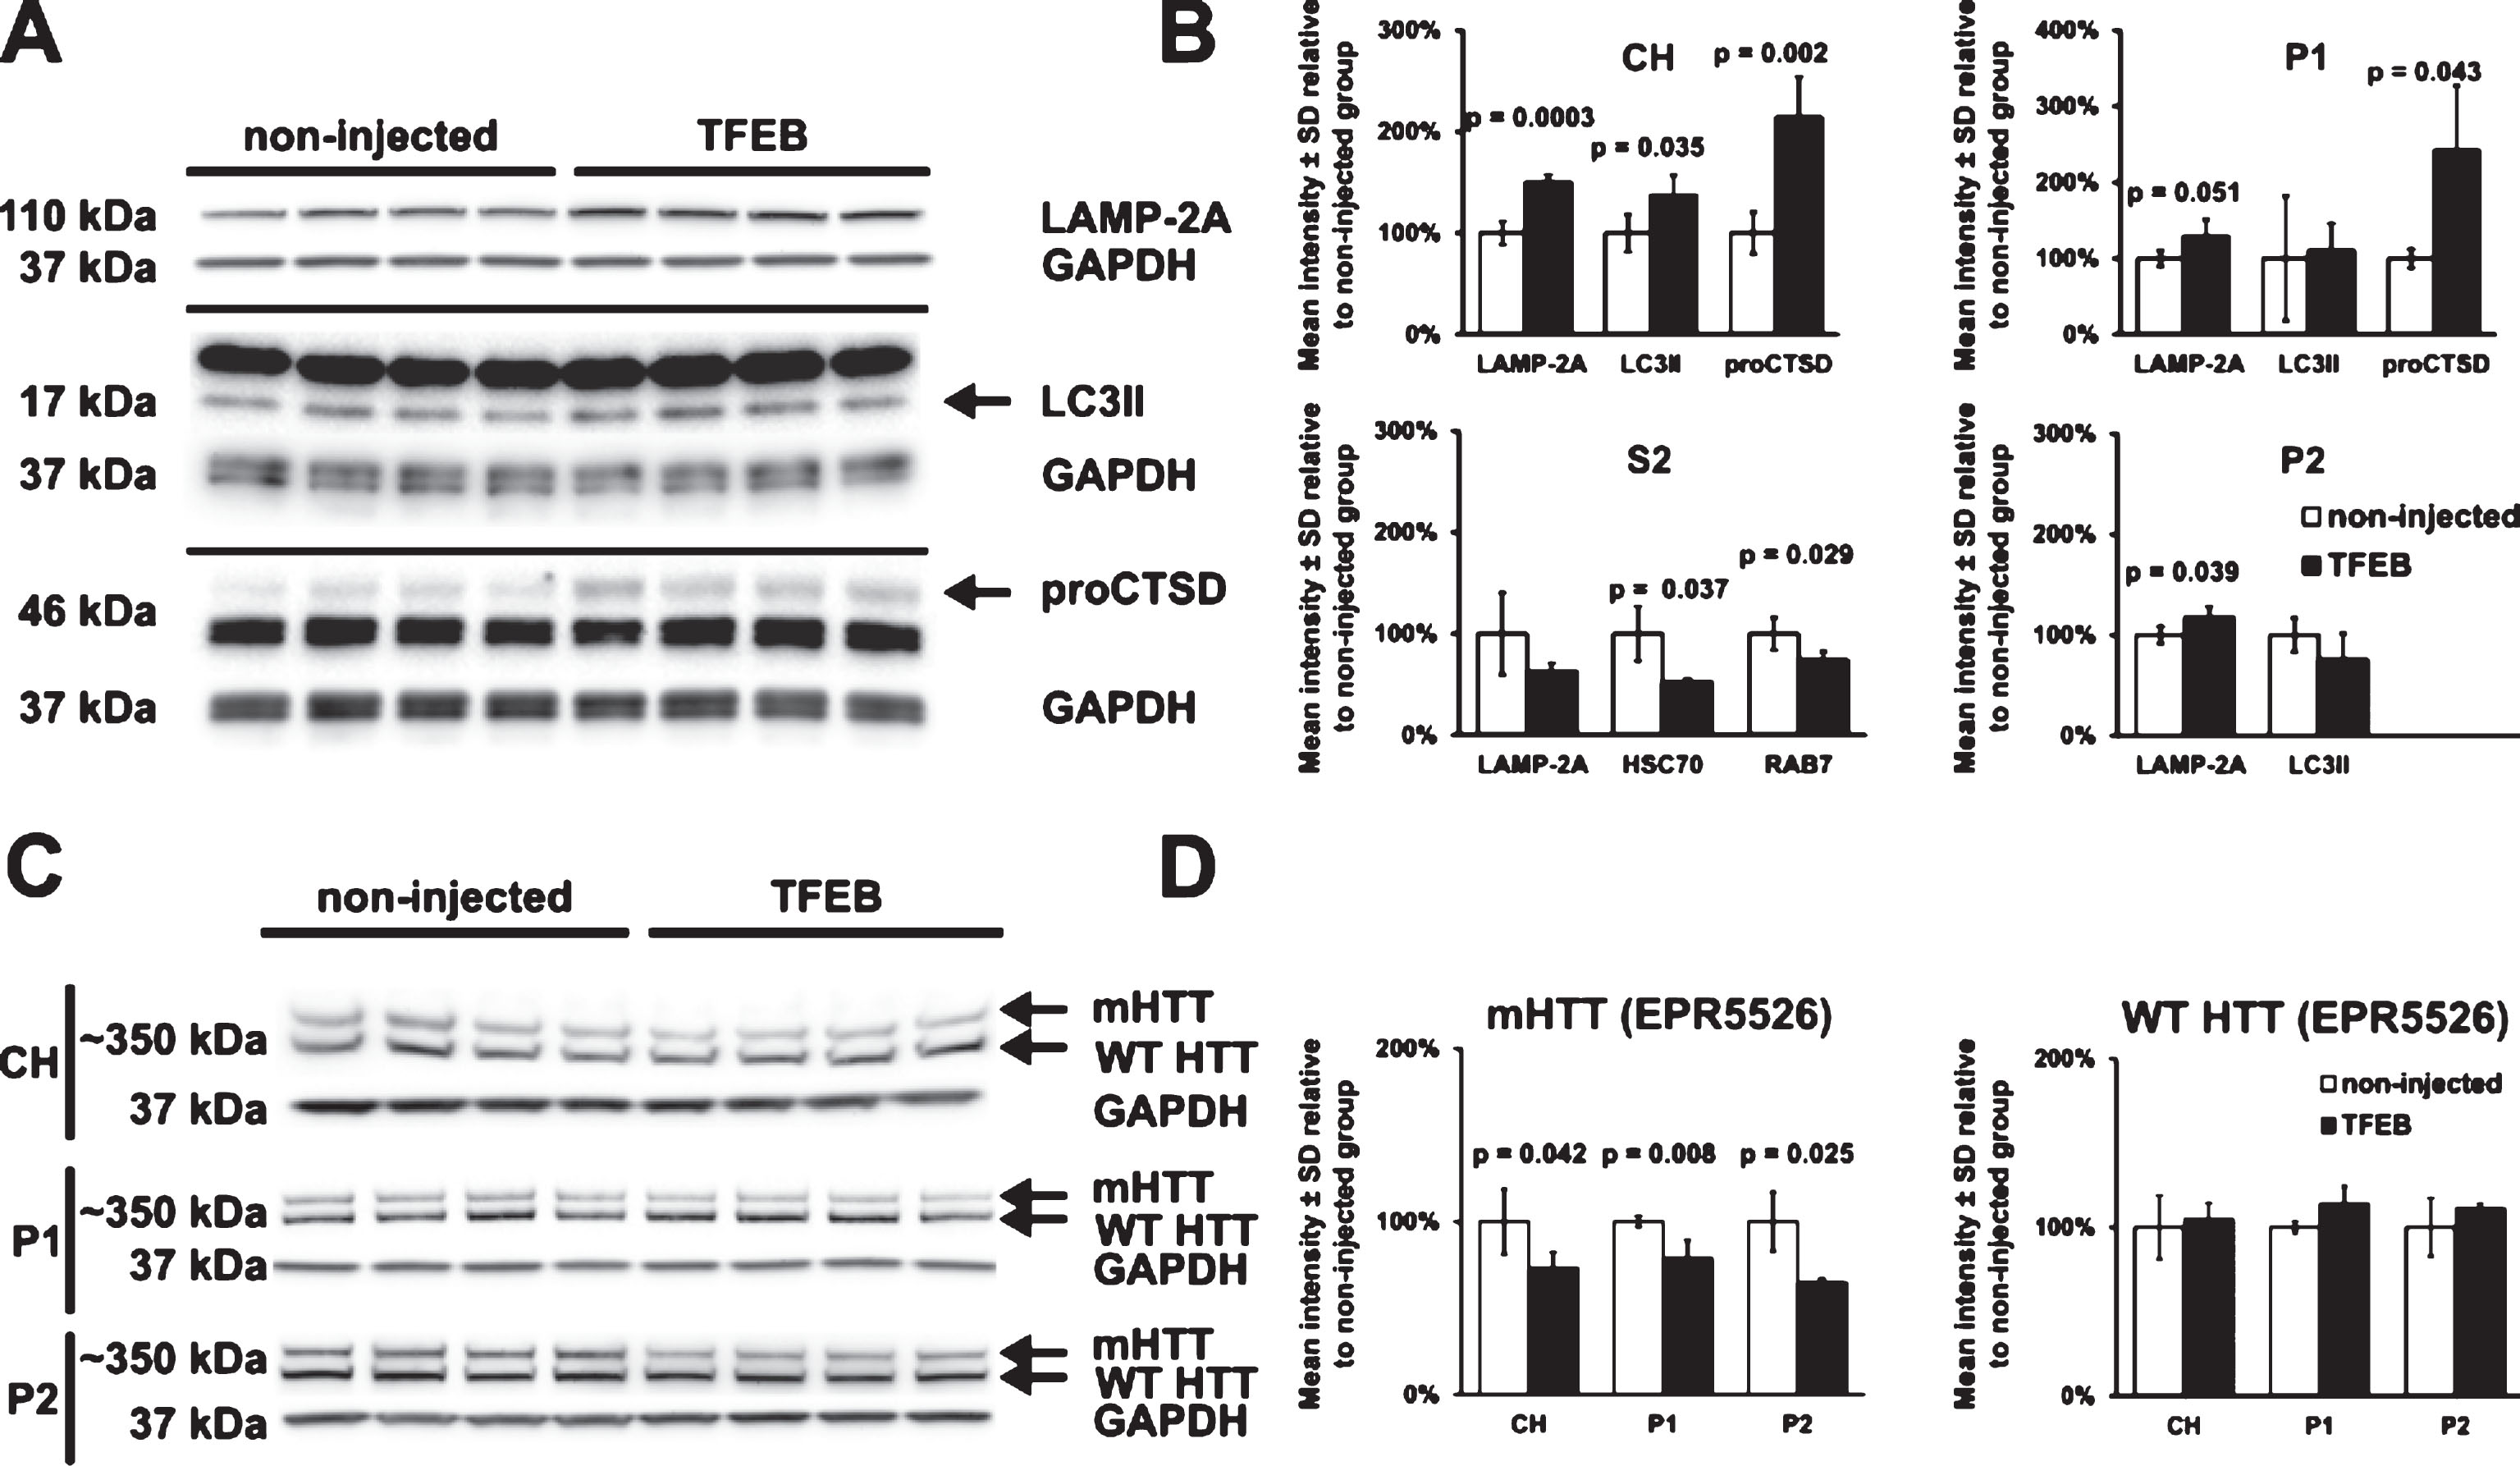 Activation of autophagy and reduction of mHTT in TFEB-HA treated striatum. A) Western blot analysis for LAMP-2A, LC3II, and procathepsin D (proCTSD) in crude homogenates (CH) of HDQ175/Q7 mice injected with AAV hSyn1 TFEB-HA or non-injected. B) Quantitative results of crude homogenate Western blots in A and Western blots in subcellular fractions (P1, S2 and P2). HSC70 and Rab7 in S2 fractions are included in the bar graphs along with the results for LAMP-2A. C) Western blots of HTT levels in crude homogenate (CH) and in membrane fractions P1 and P2 detected with anti-HTT aa1-100 antibody EPR5526. D) Bar-graphs represent the results of densitometry for mHTT and WT HTT on Western blots shown in C. Mutant HTT levels in the AAV hSyn1 TFEB-HA injected mice are reduced compared to the untreated mice. All mice are age matched and the injected mice were examined at 2 months post-injection. N = 4 per treatment group, p-values from unpaired t-test.